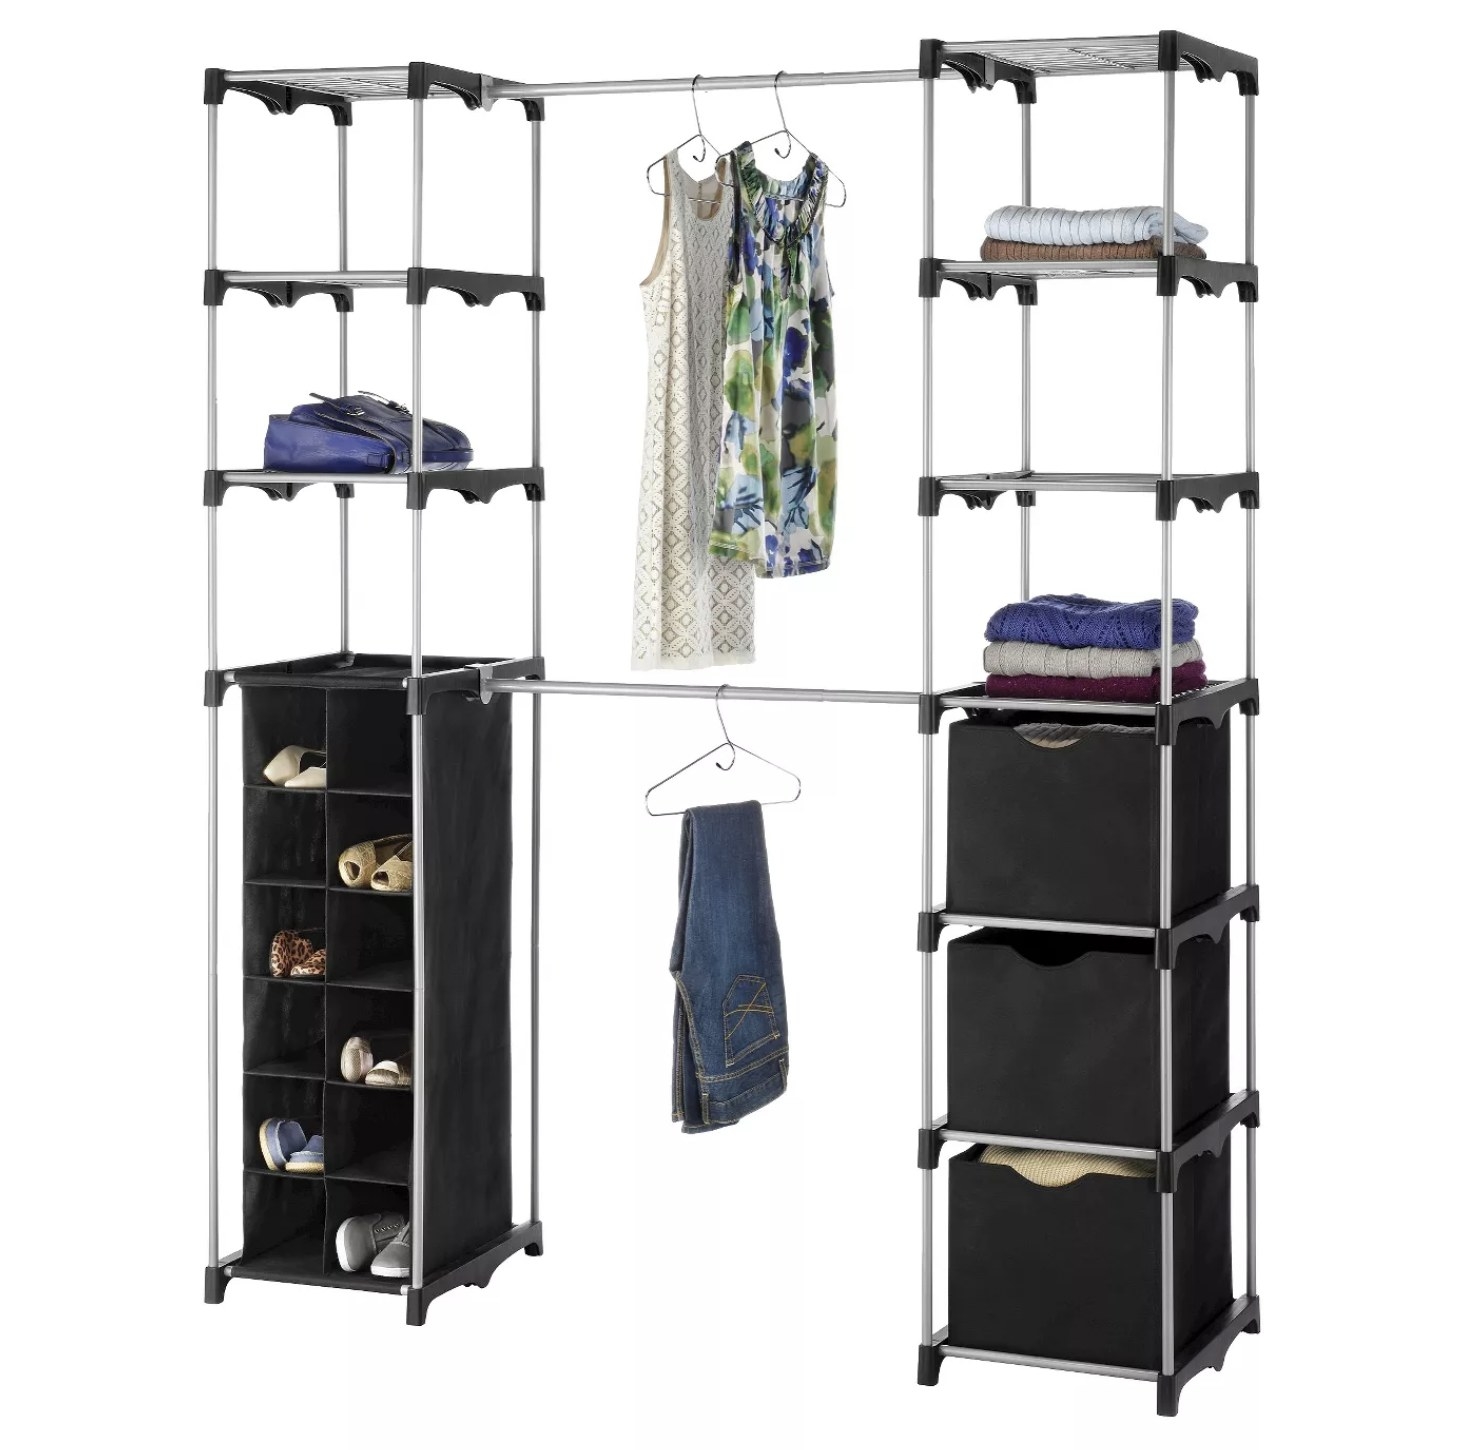 A free-standing closet organizer with a black, fabric organizer for 12 pairs of shoes, two closet rods, nine shelves, and three black fabric bins.